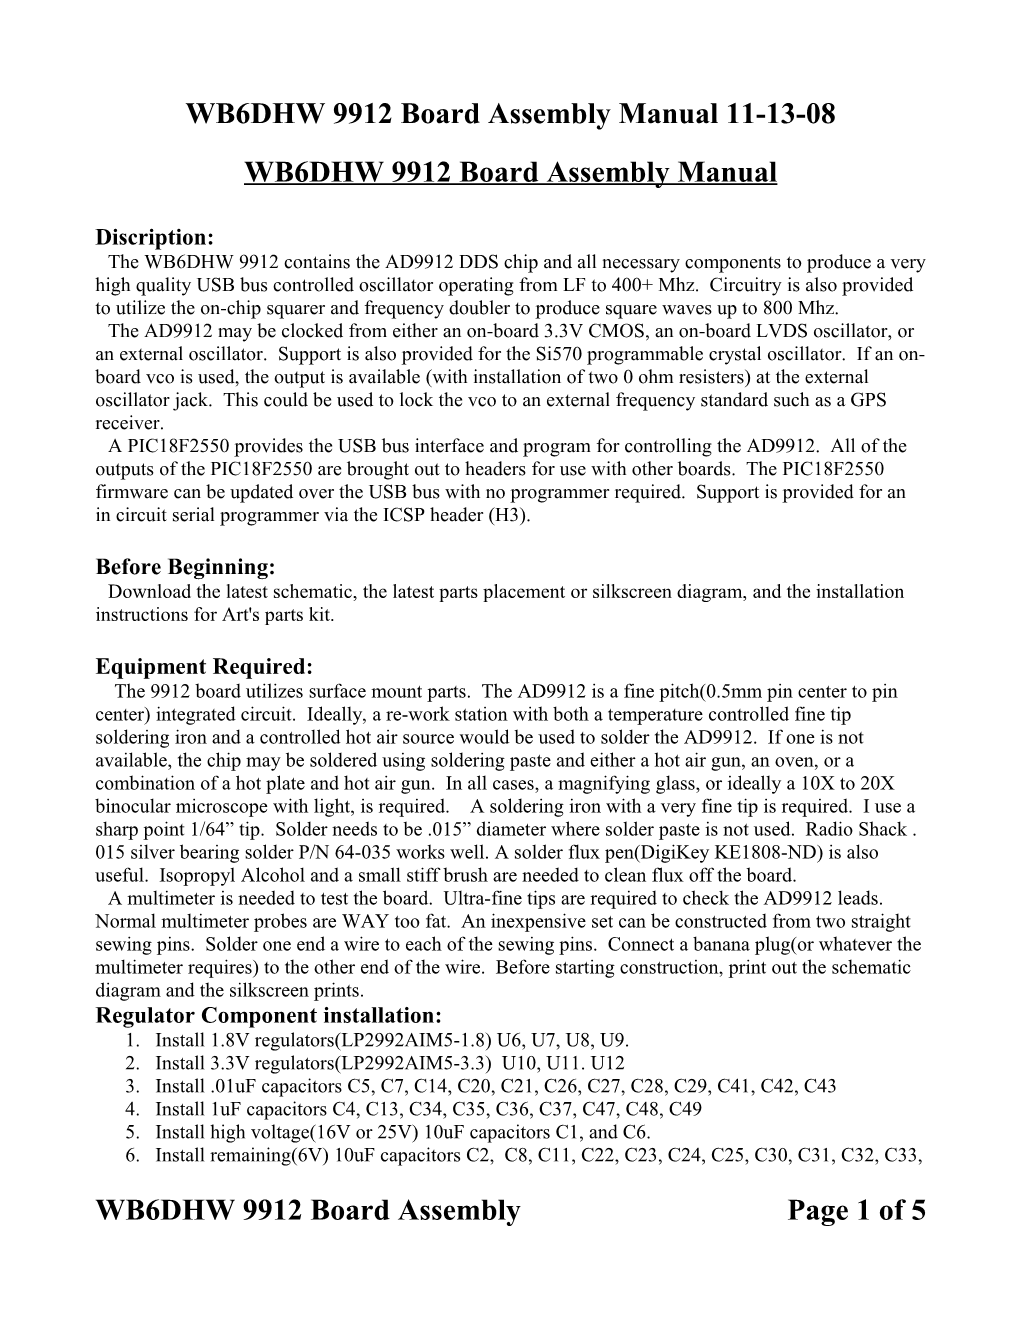 WB6DHW 9912 Board Assembly Manual 11-13-08